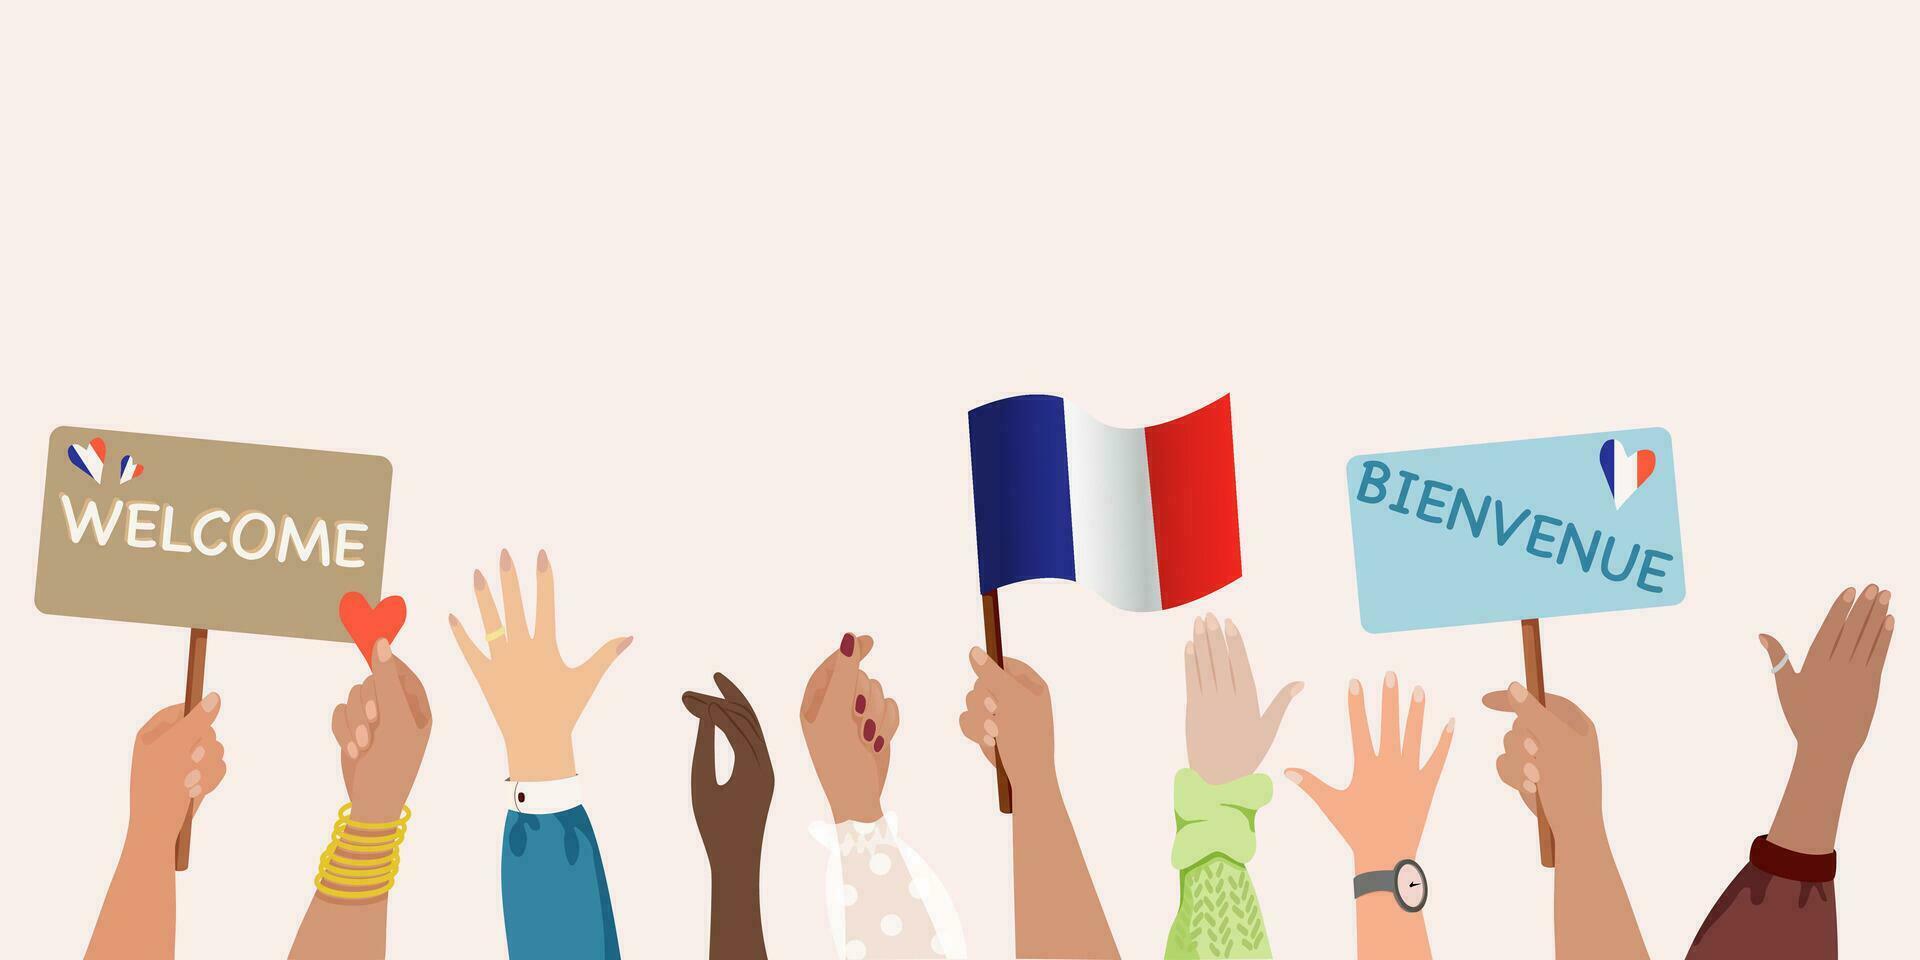 Raised arms and hands of multi-ethnic people from different nations holding French flag, boards with lettering welcome and bienvenue. Olympic games 2024 welcome concept. Vector illustration.